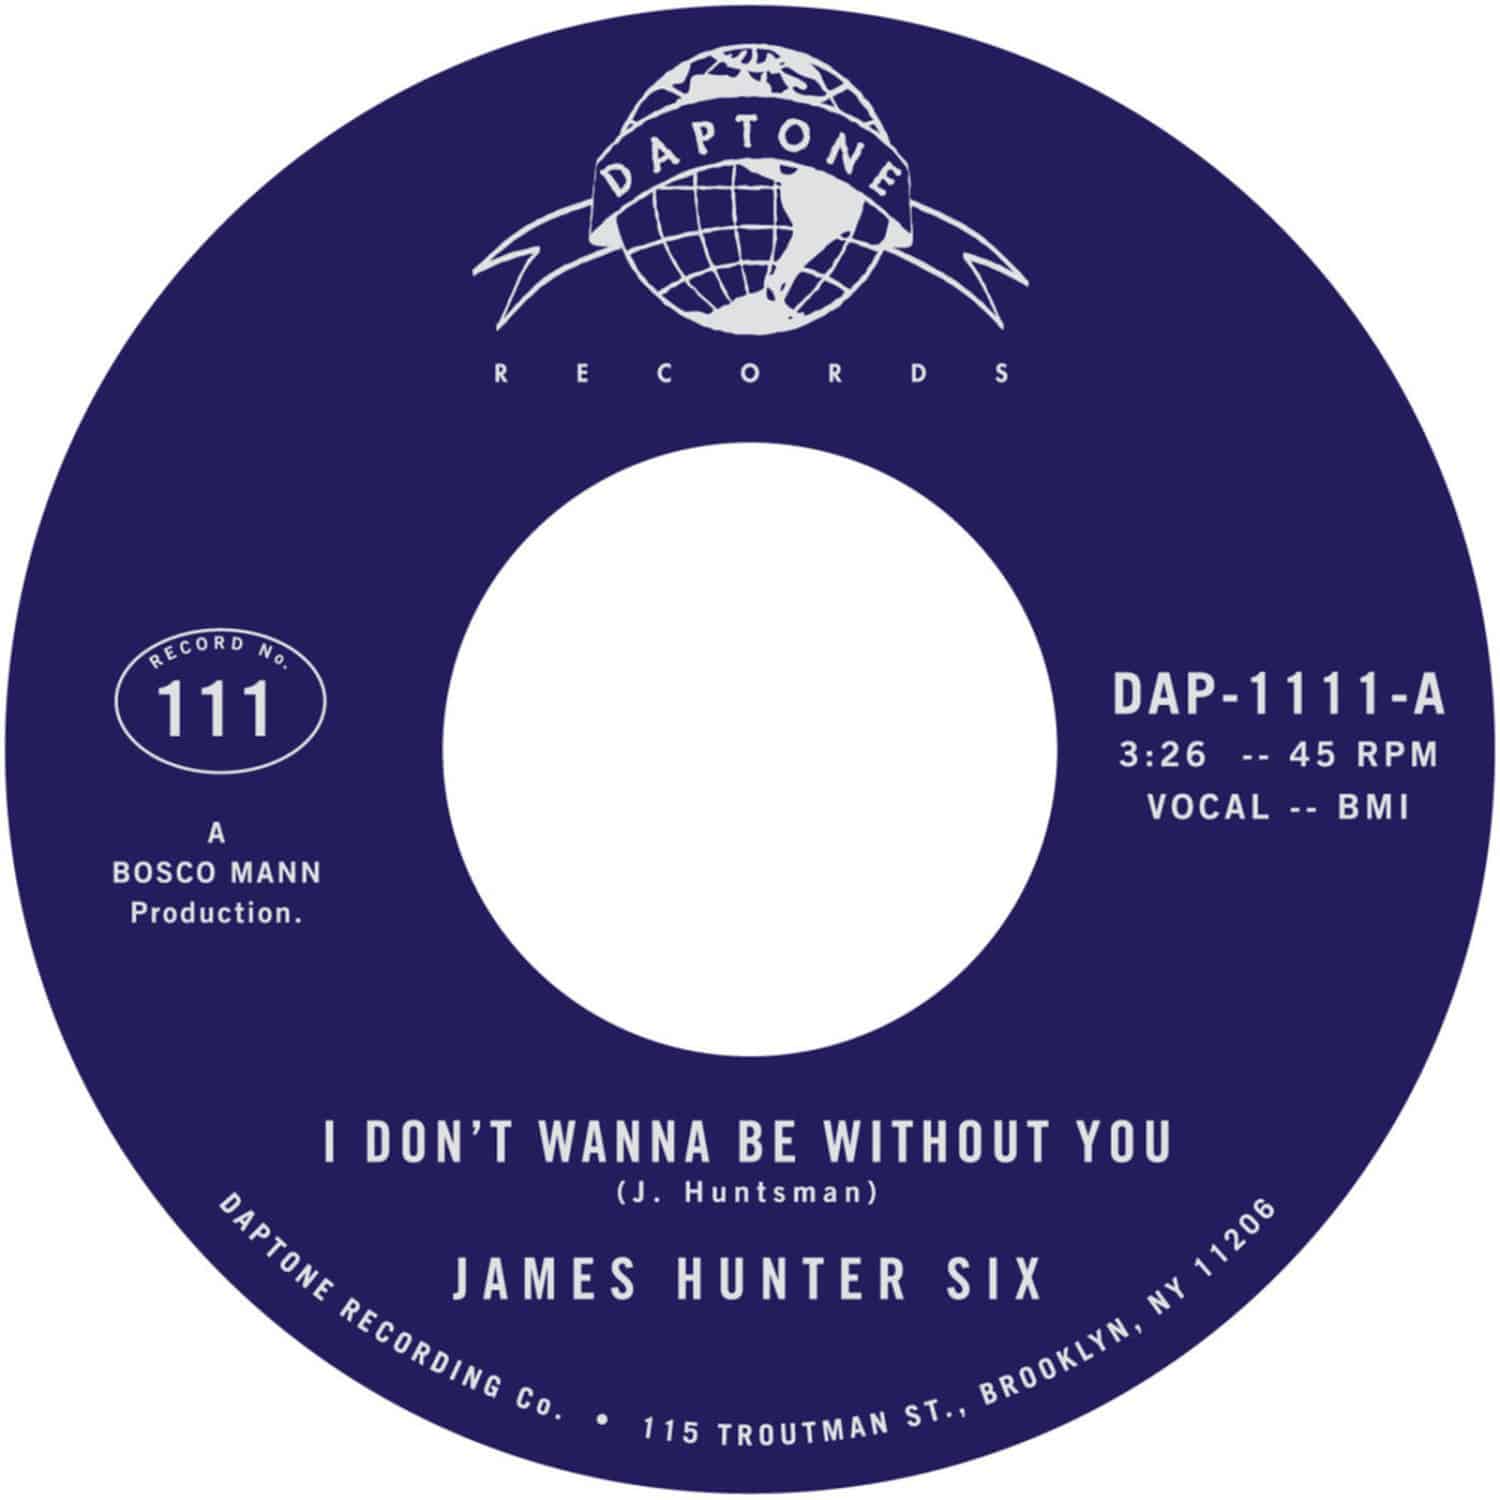 The James Hunter Six - I DONT WANNA BE WITHOUT YOU / I GOT EYES 